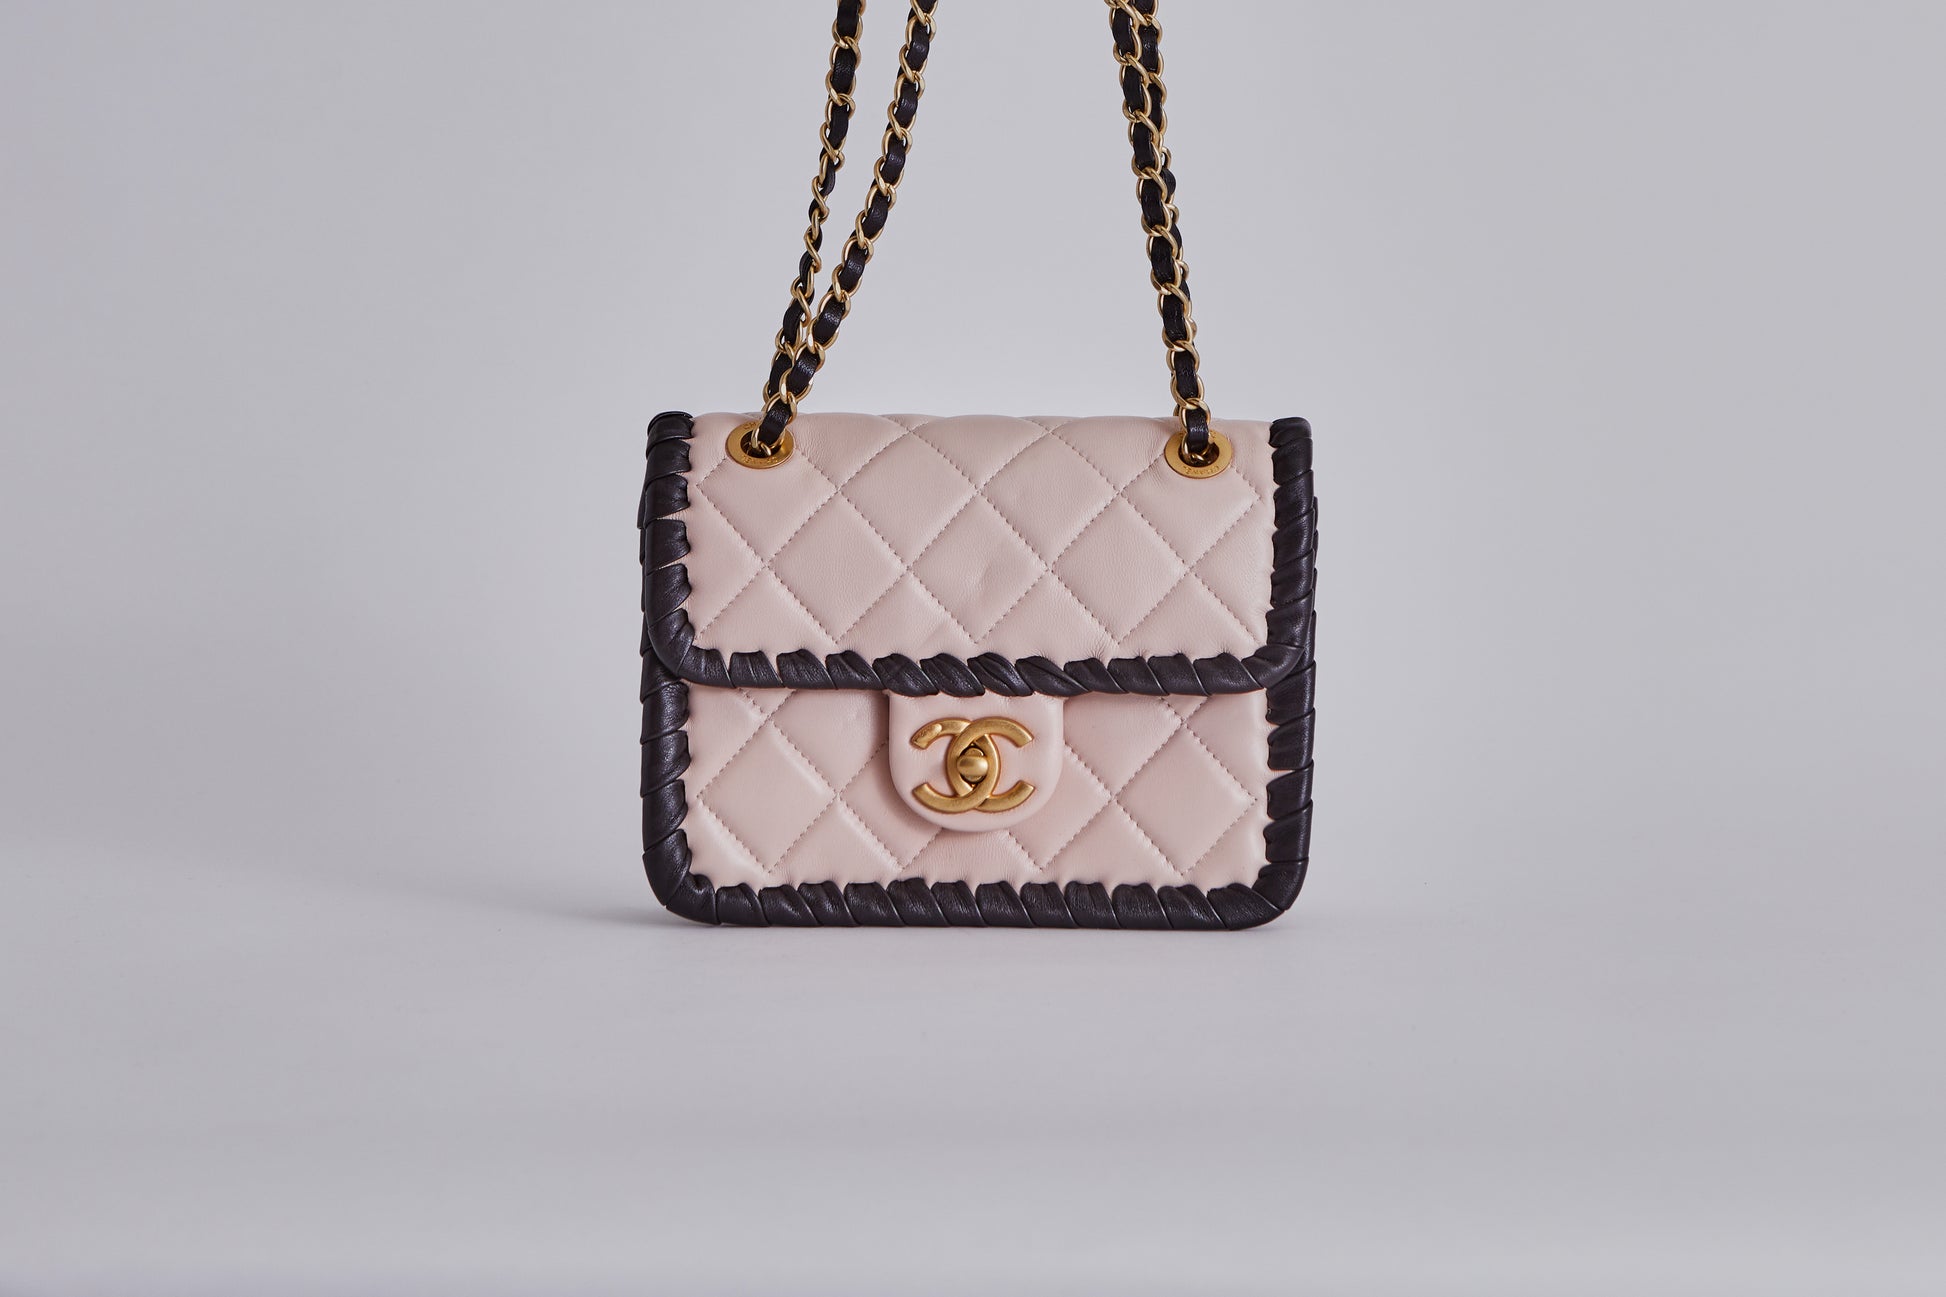 Chanel Pink and Black Quilted Lambskin Mini Flap Bag